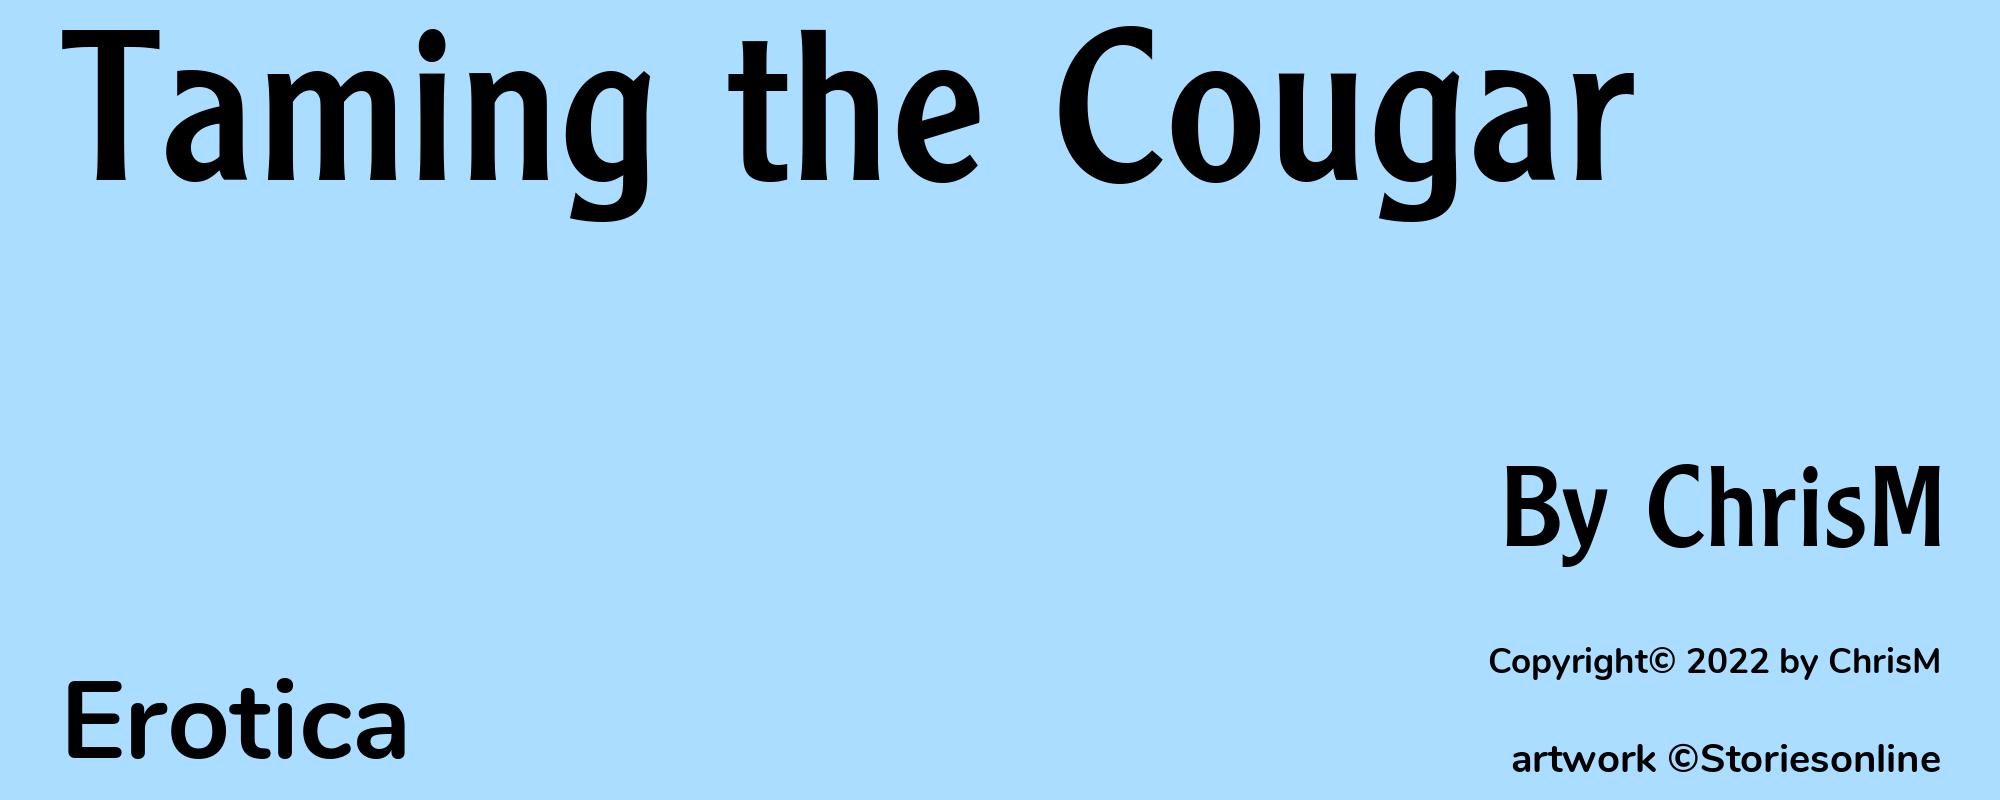 Taming the Cougar - Cover